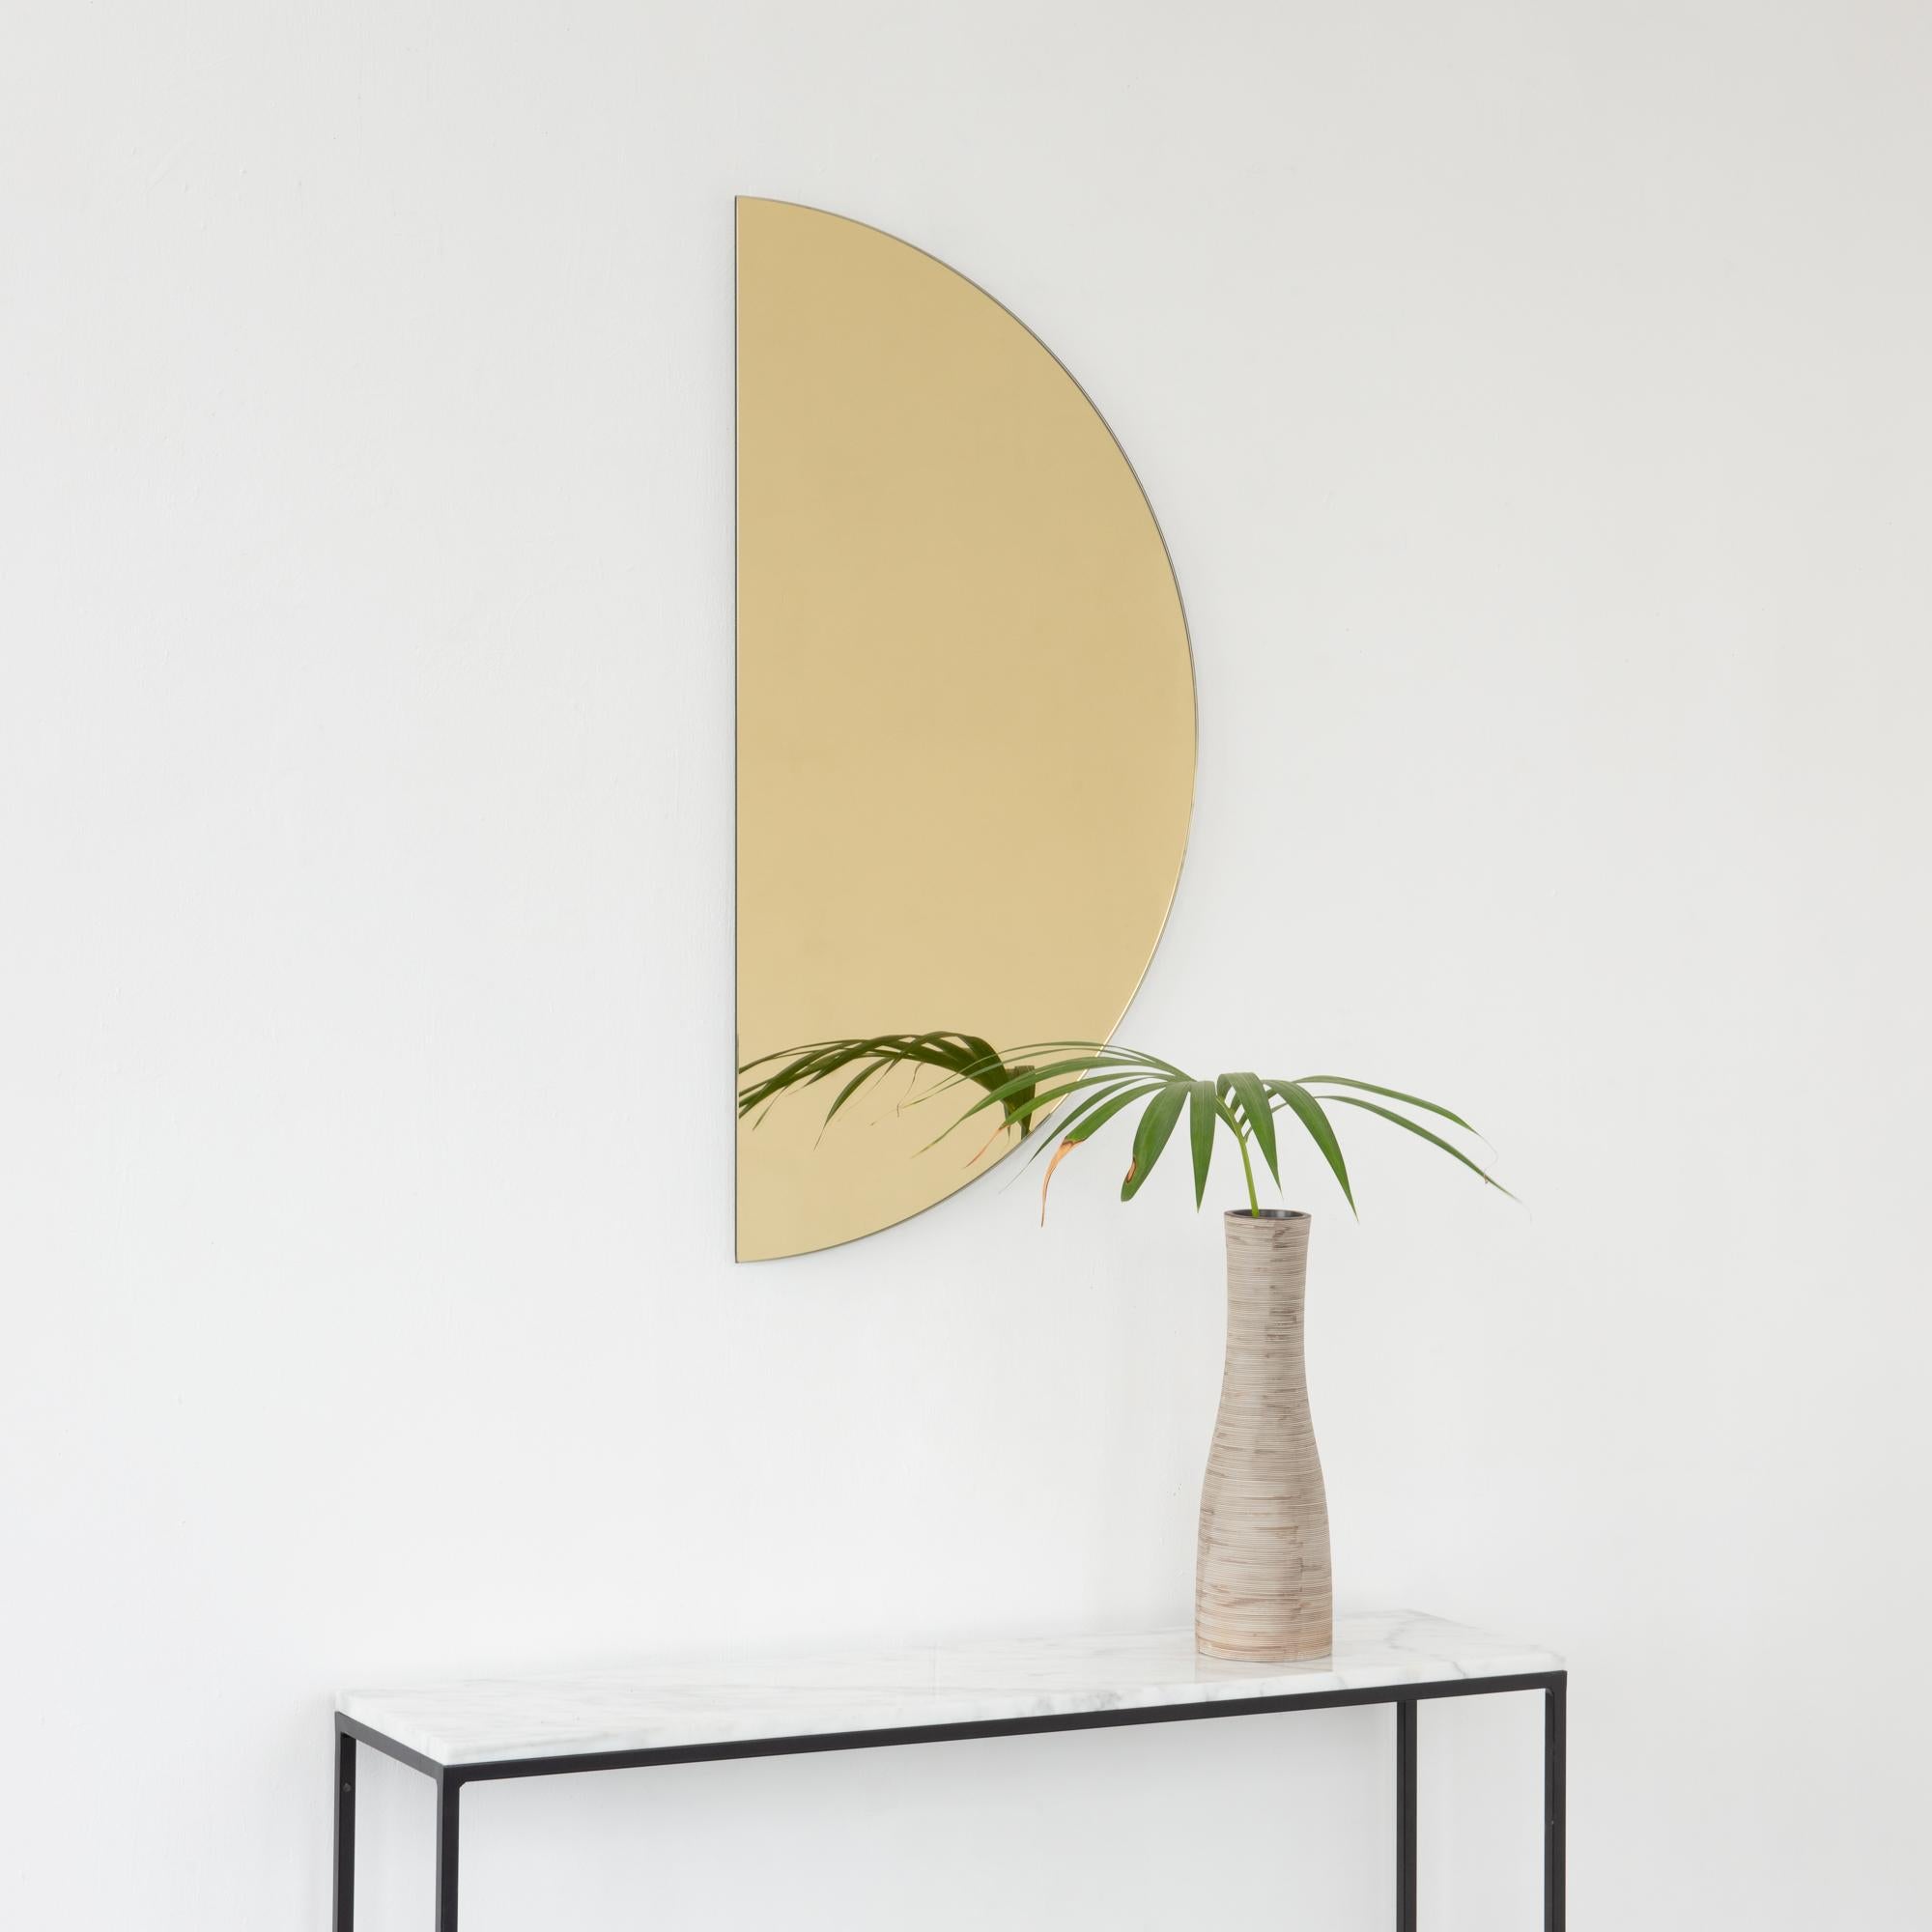 Minimalist half-moon Luna™ gold tinted frameless mirror with a floating effect. Fitted with a quality hanging system for a flexible installation in 4 different directions. Designed and made in London, UK. 

Our mirrors are designed with an